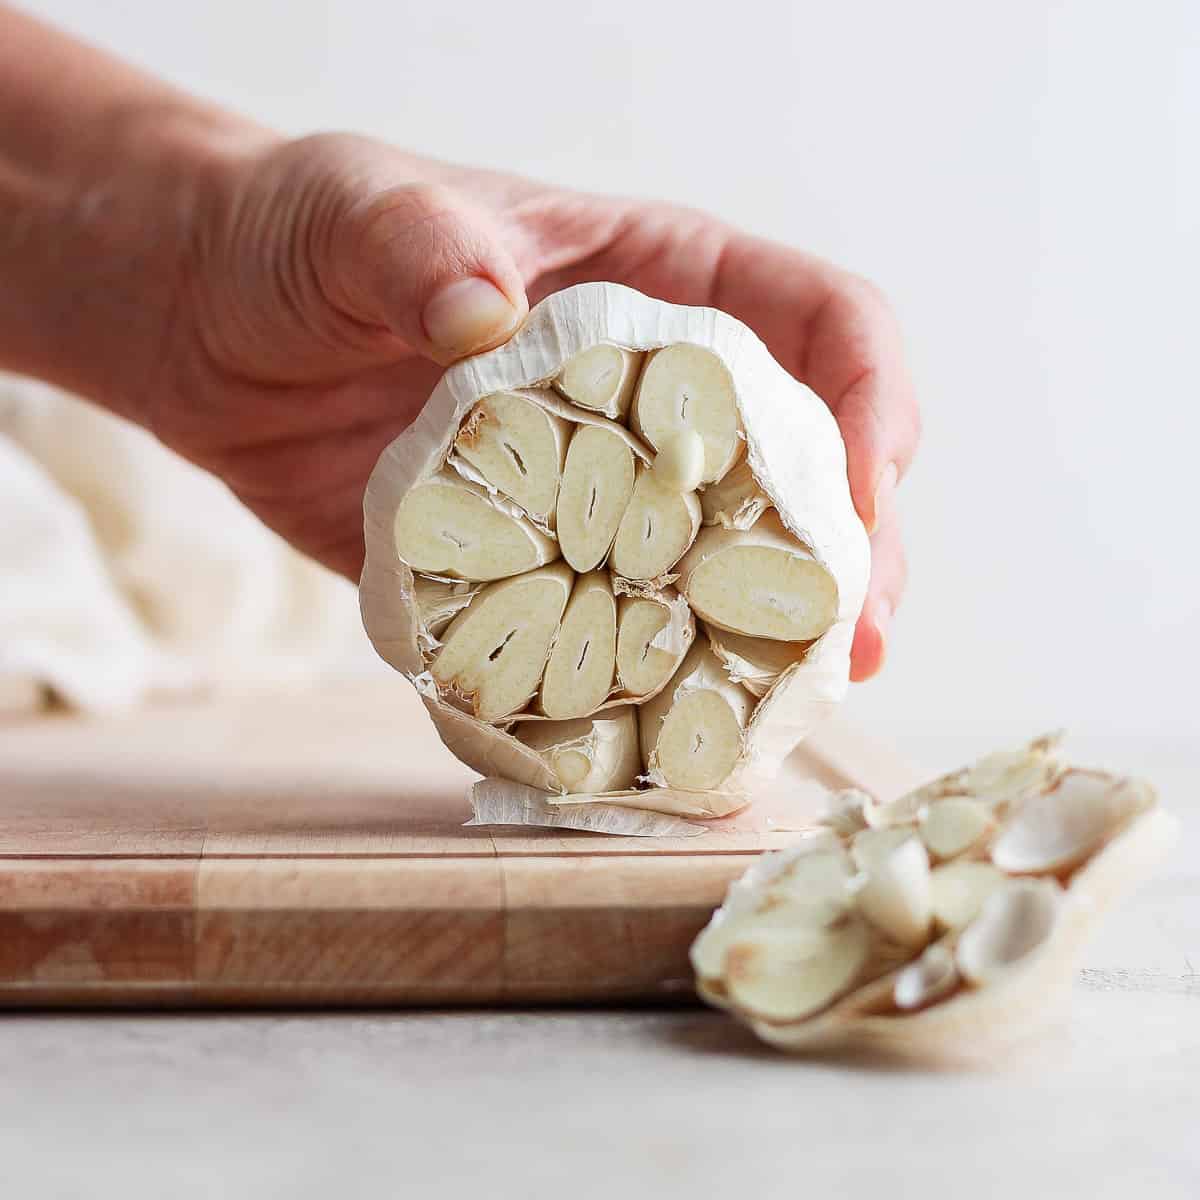 Hand holding head of garlic with top cut off to show the exposed garlic cloves